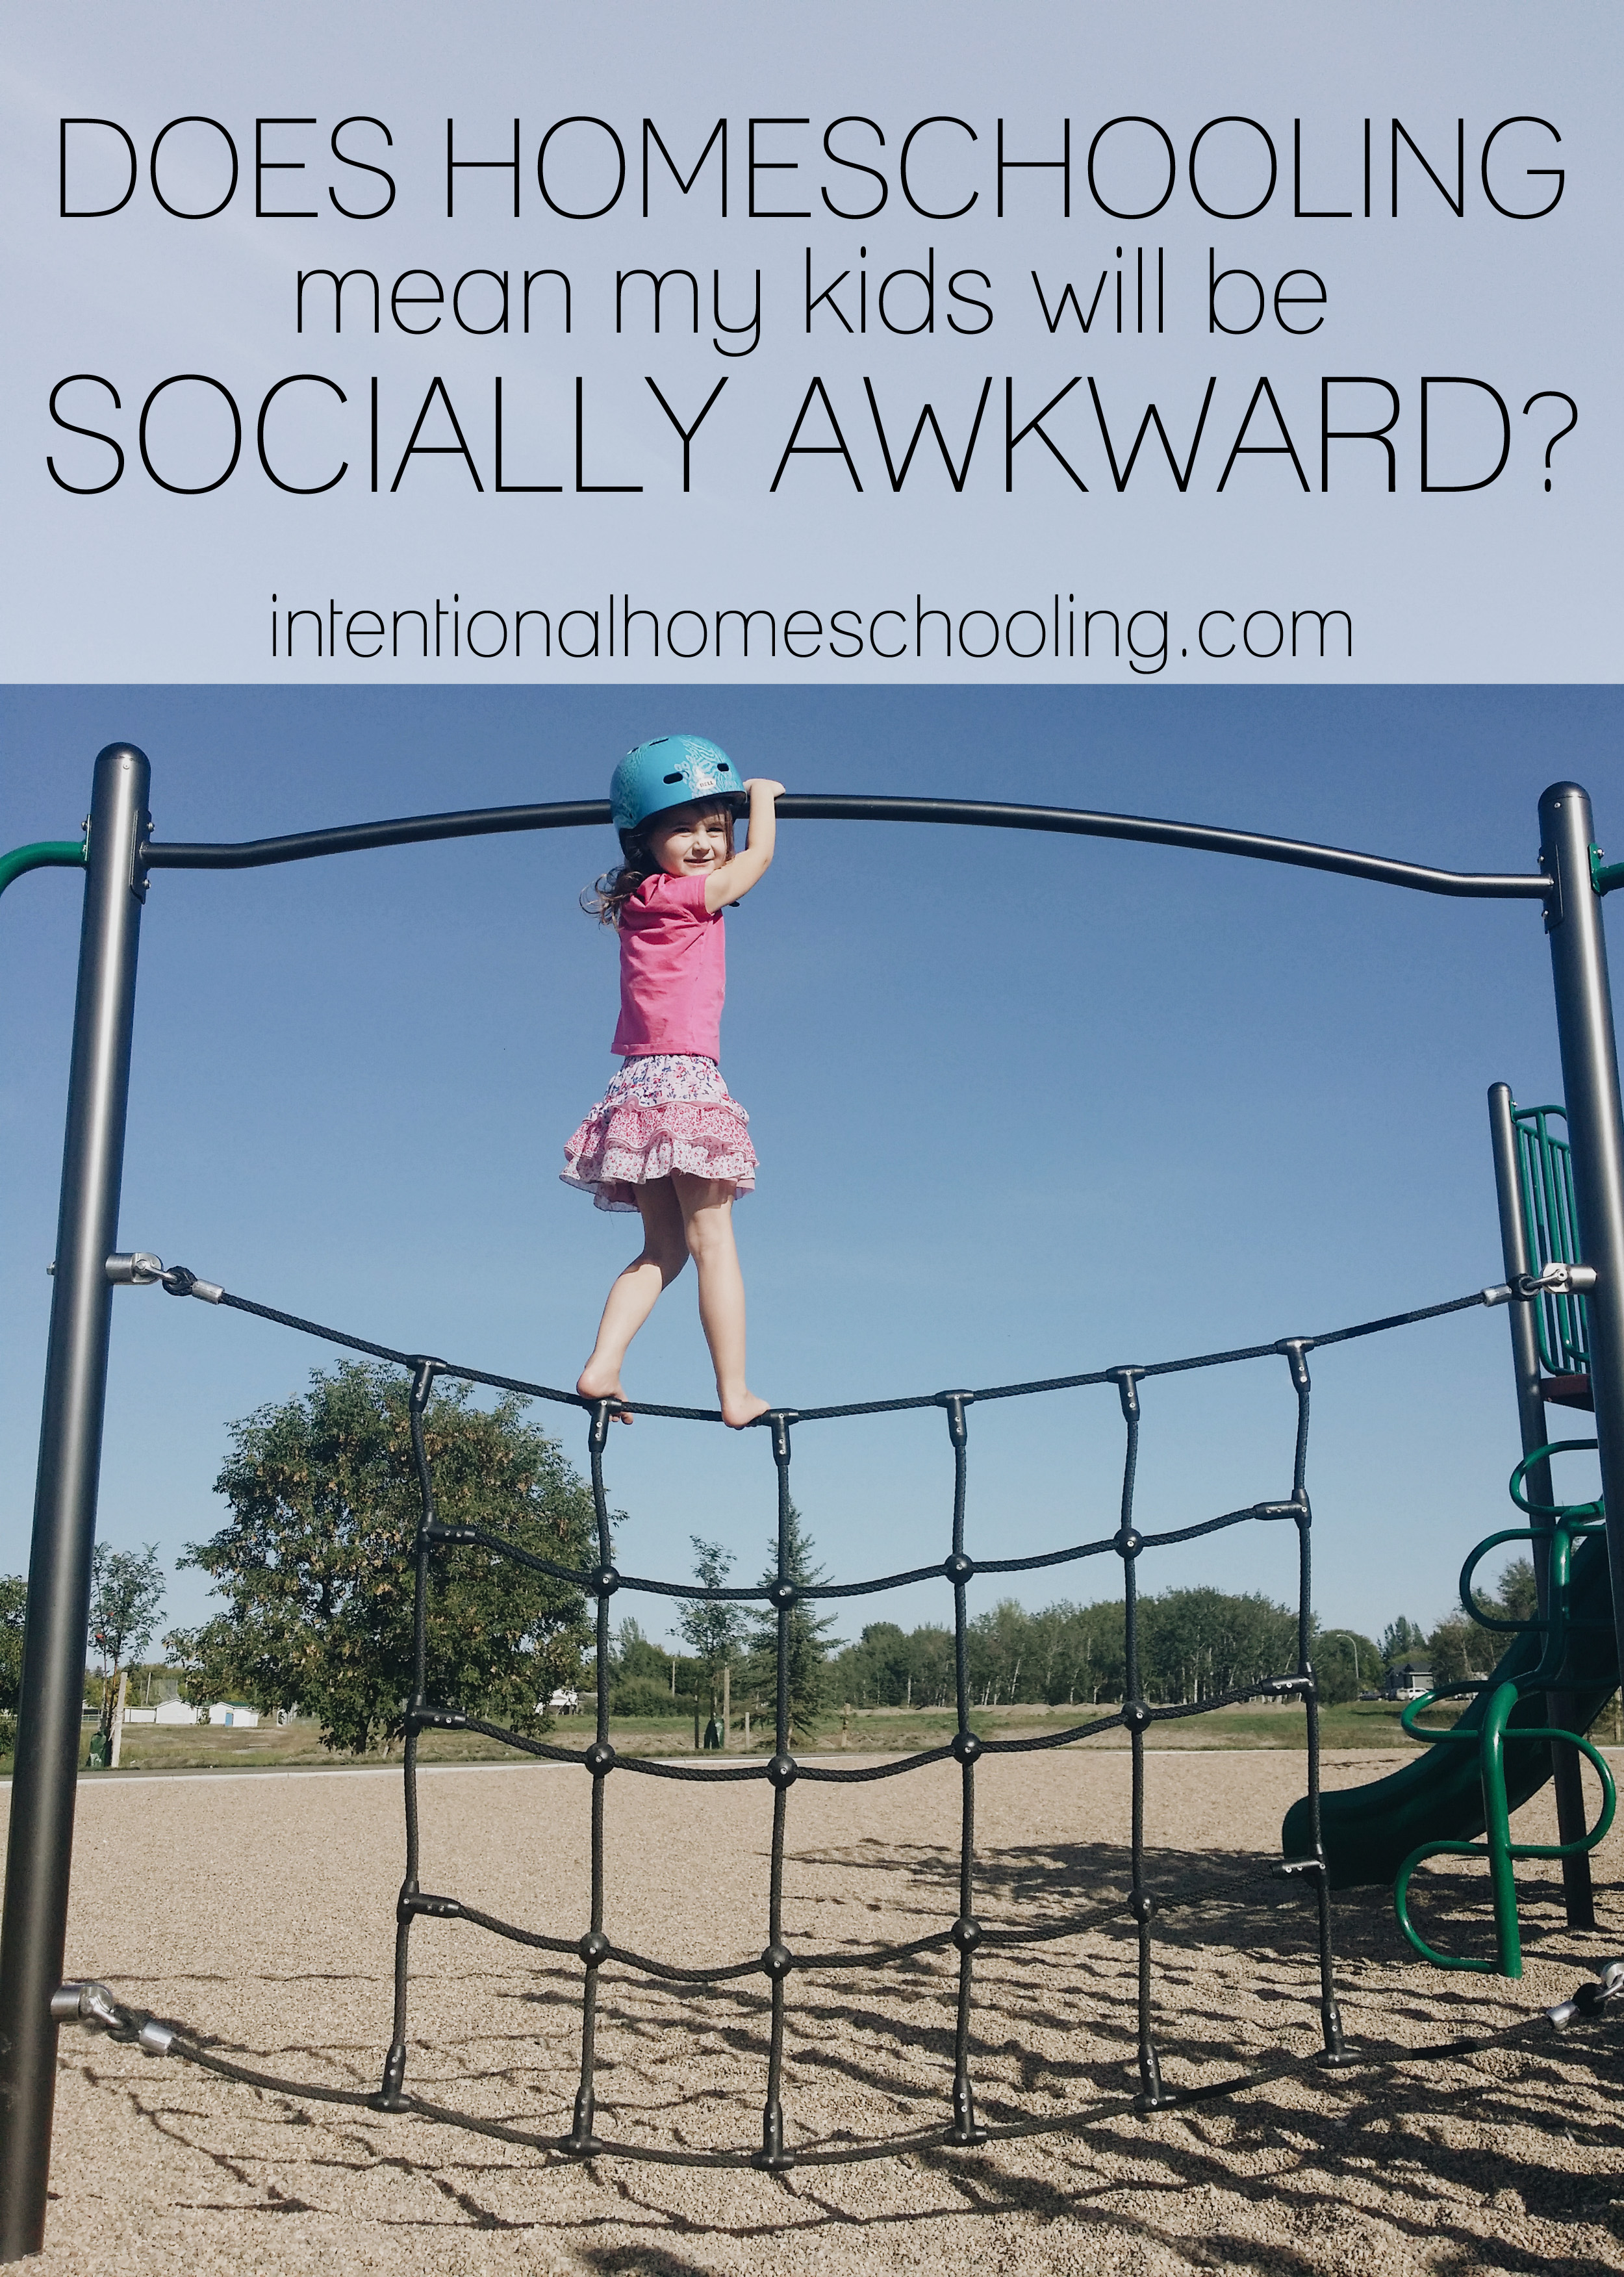 Does Homeschooling Mean My Kids Will Be Socially Awkward?